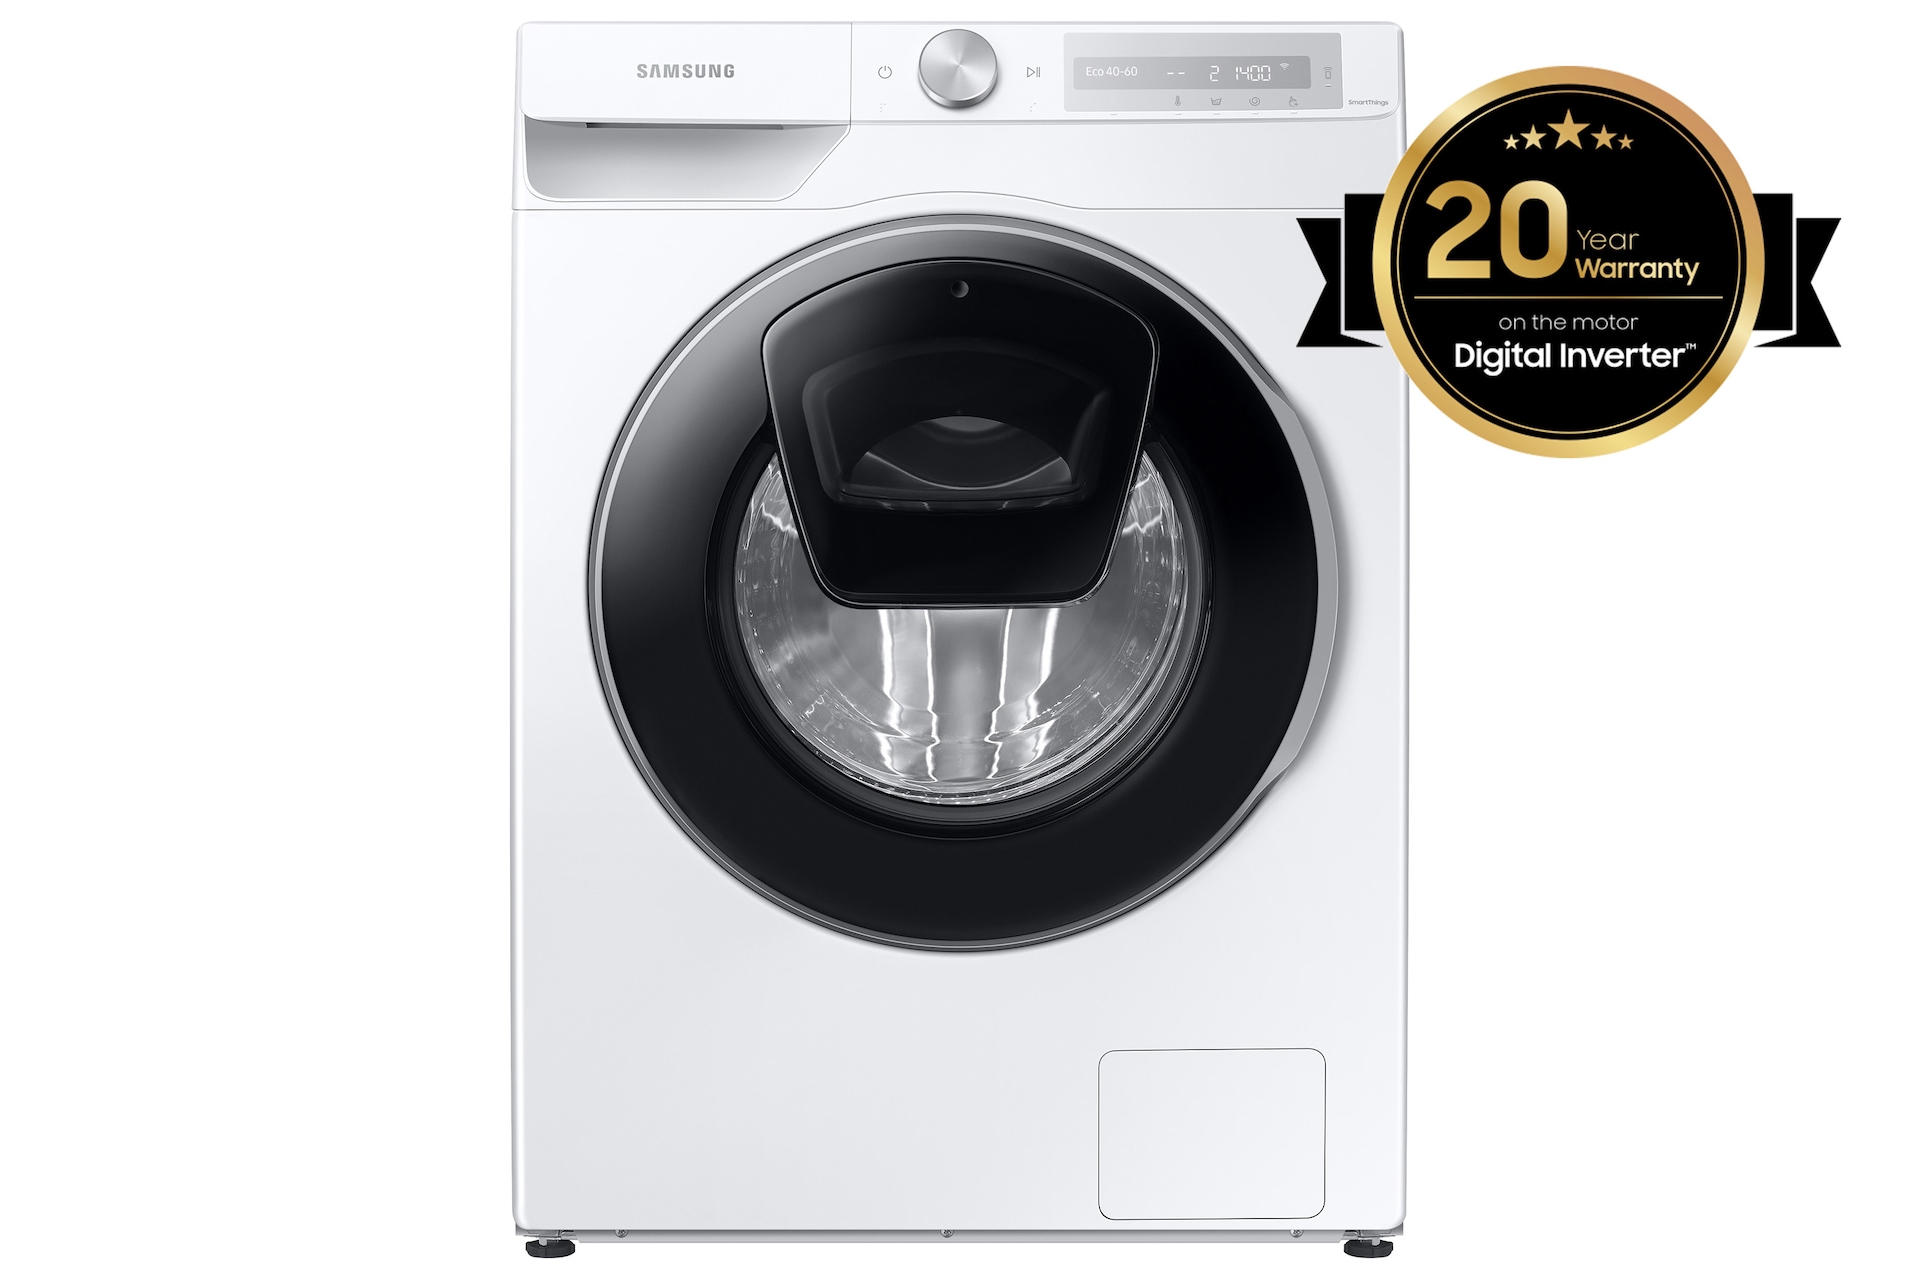 https://images.samsung.com/is/image/samsung/p6pim/fr/ww90t684dlh-s3/gallery/fr-washer-ww90t684dlh-ww90t684dlh-s3-533680036?$650_519_PNG$